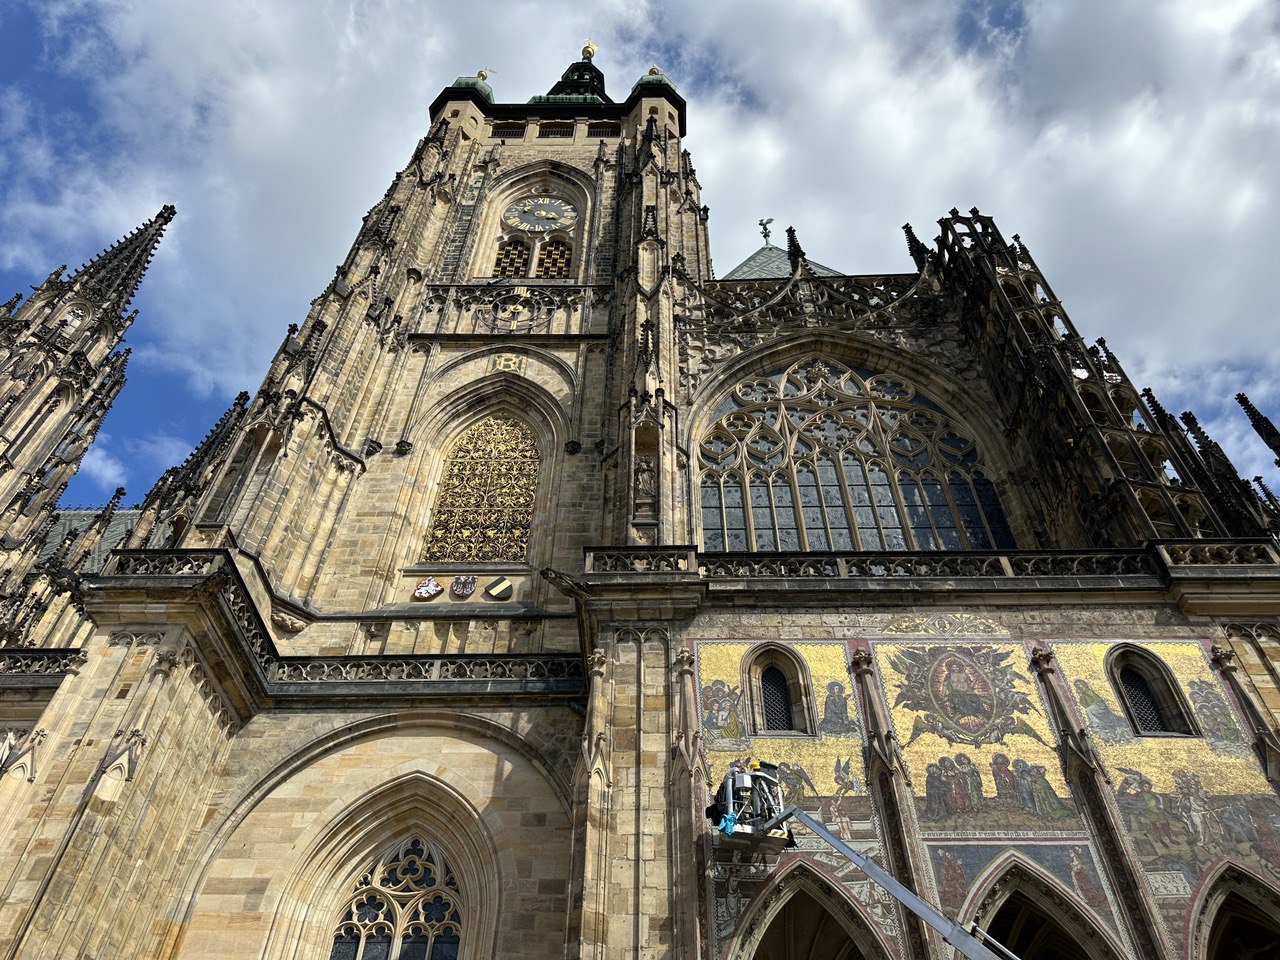 The St. Vitus Cathedral in the Prague Castle complex